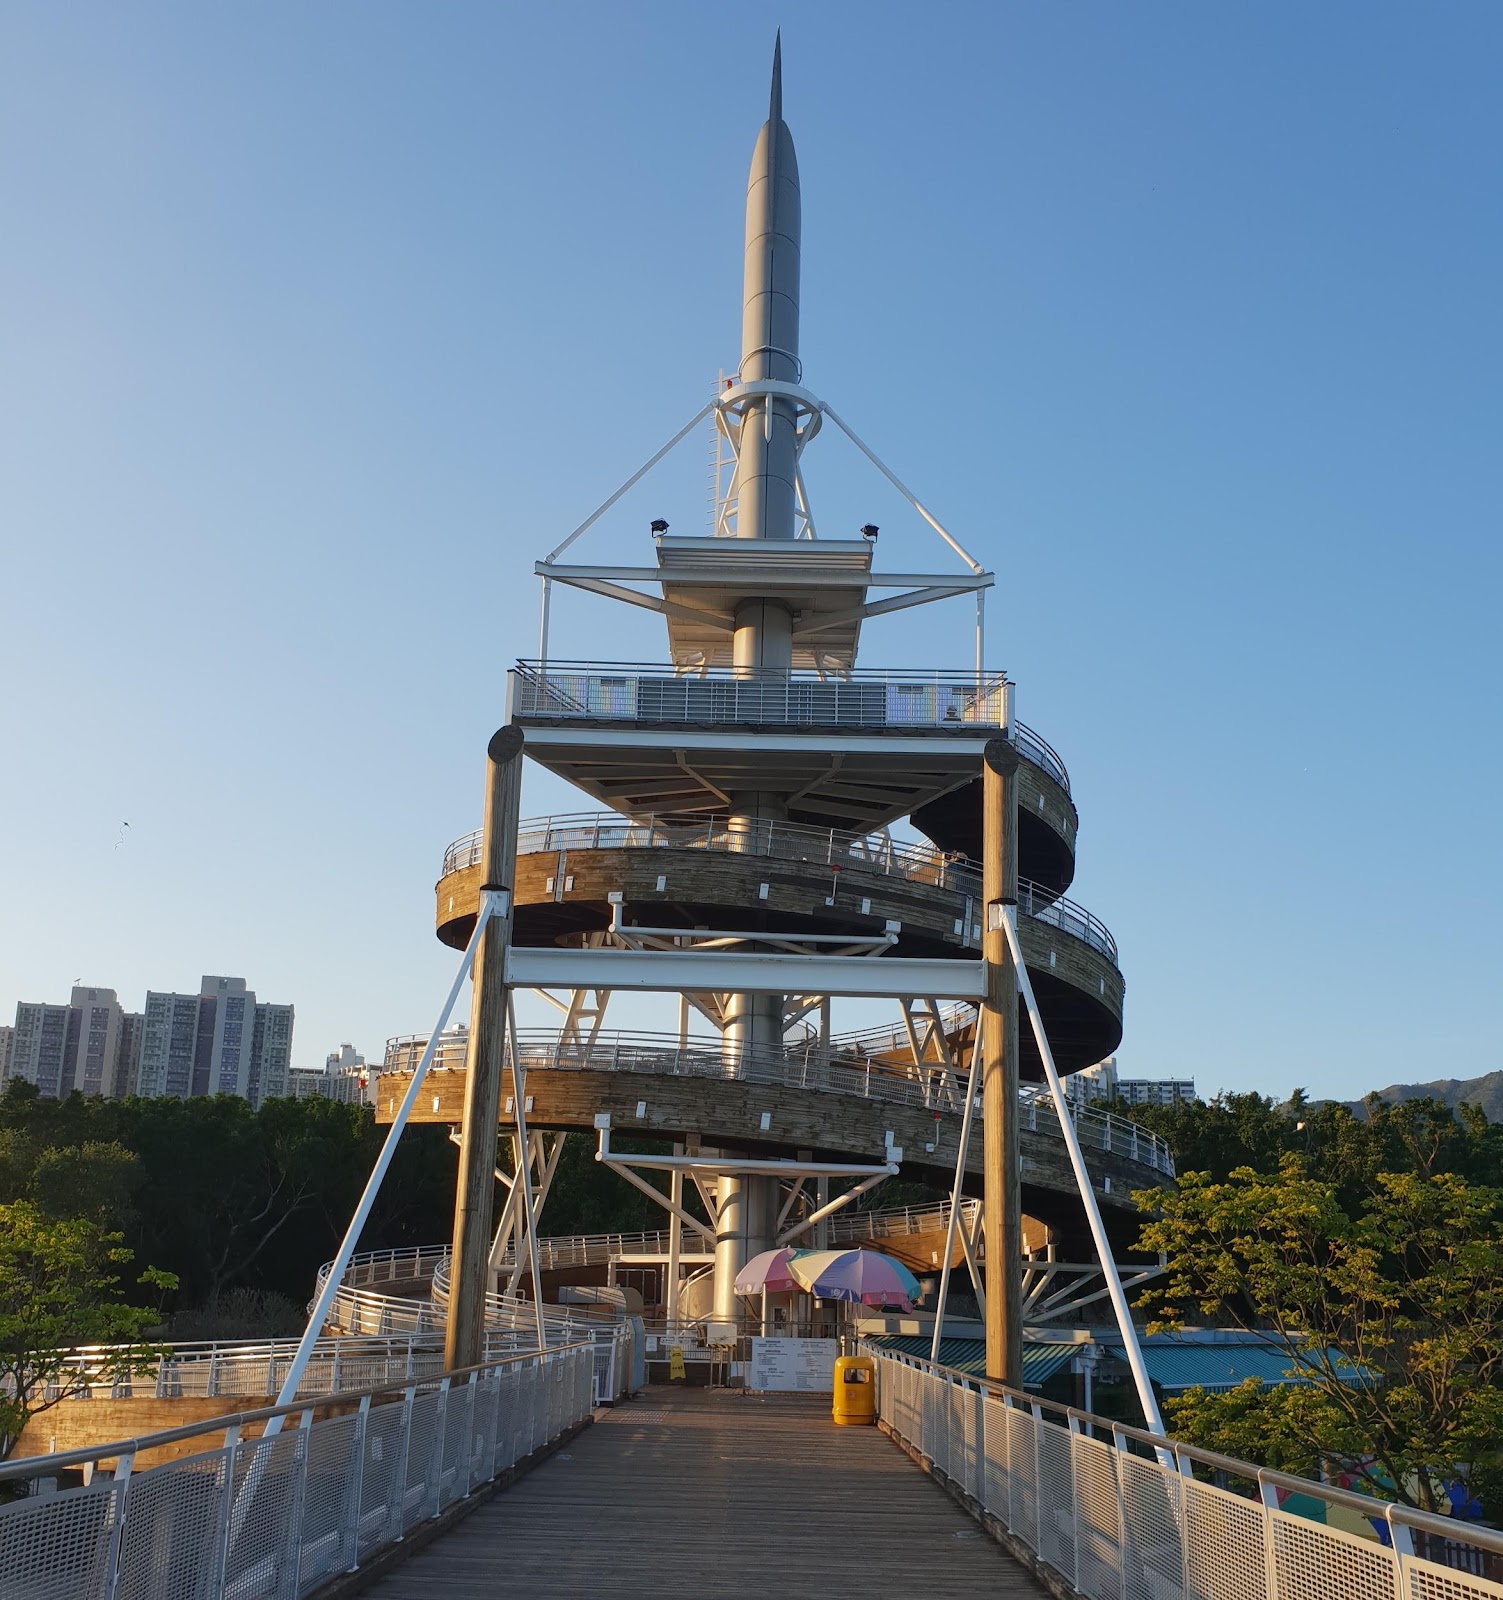 The Spiral Lookout Tower at the Tai Po Waterfront Park